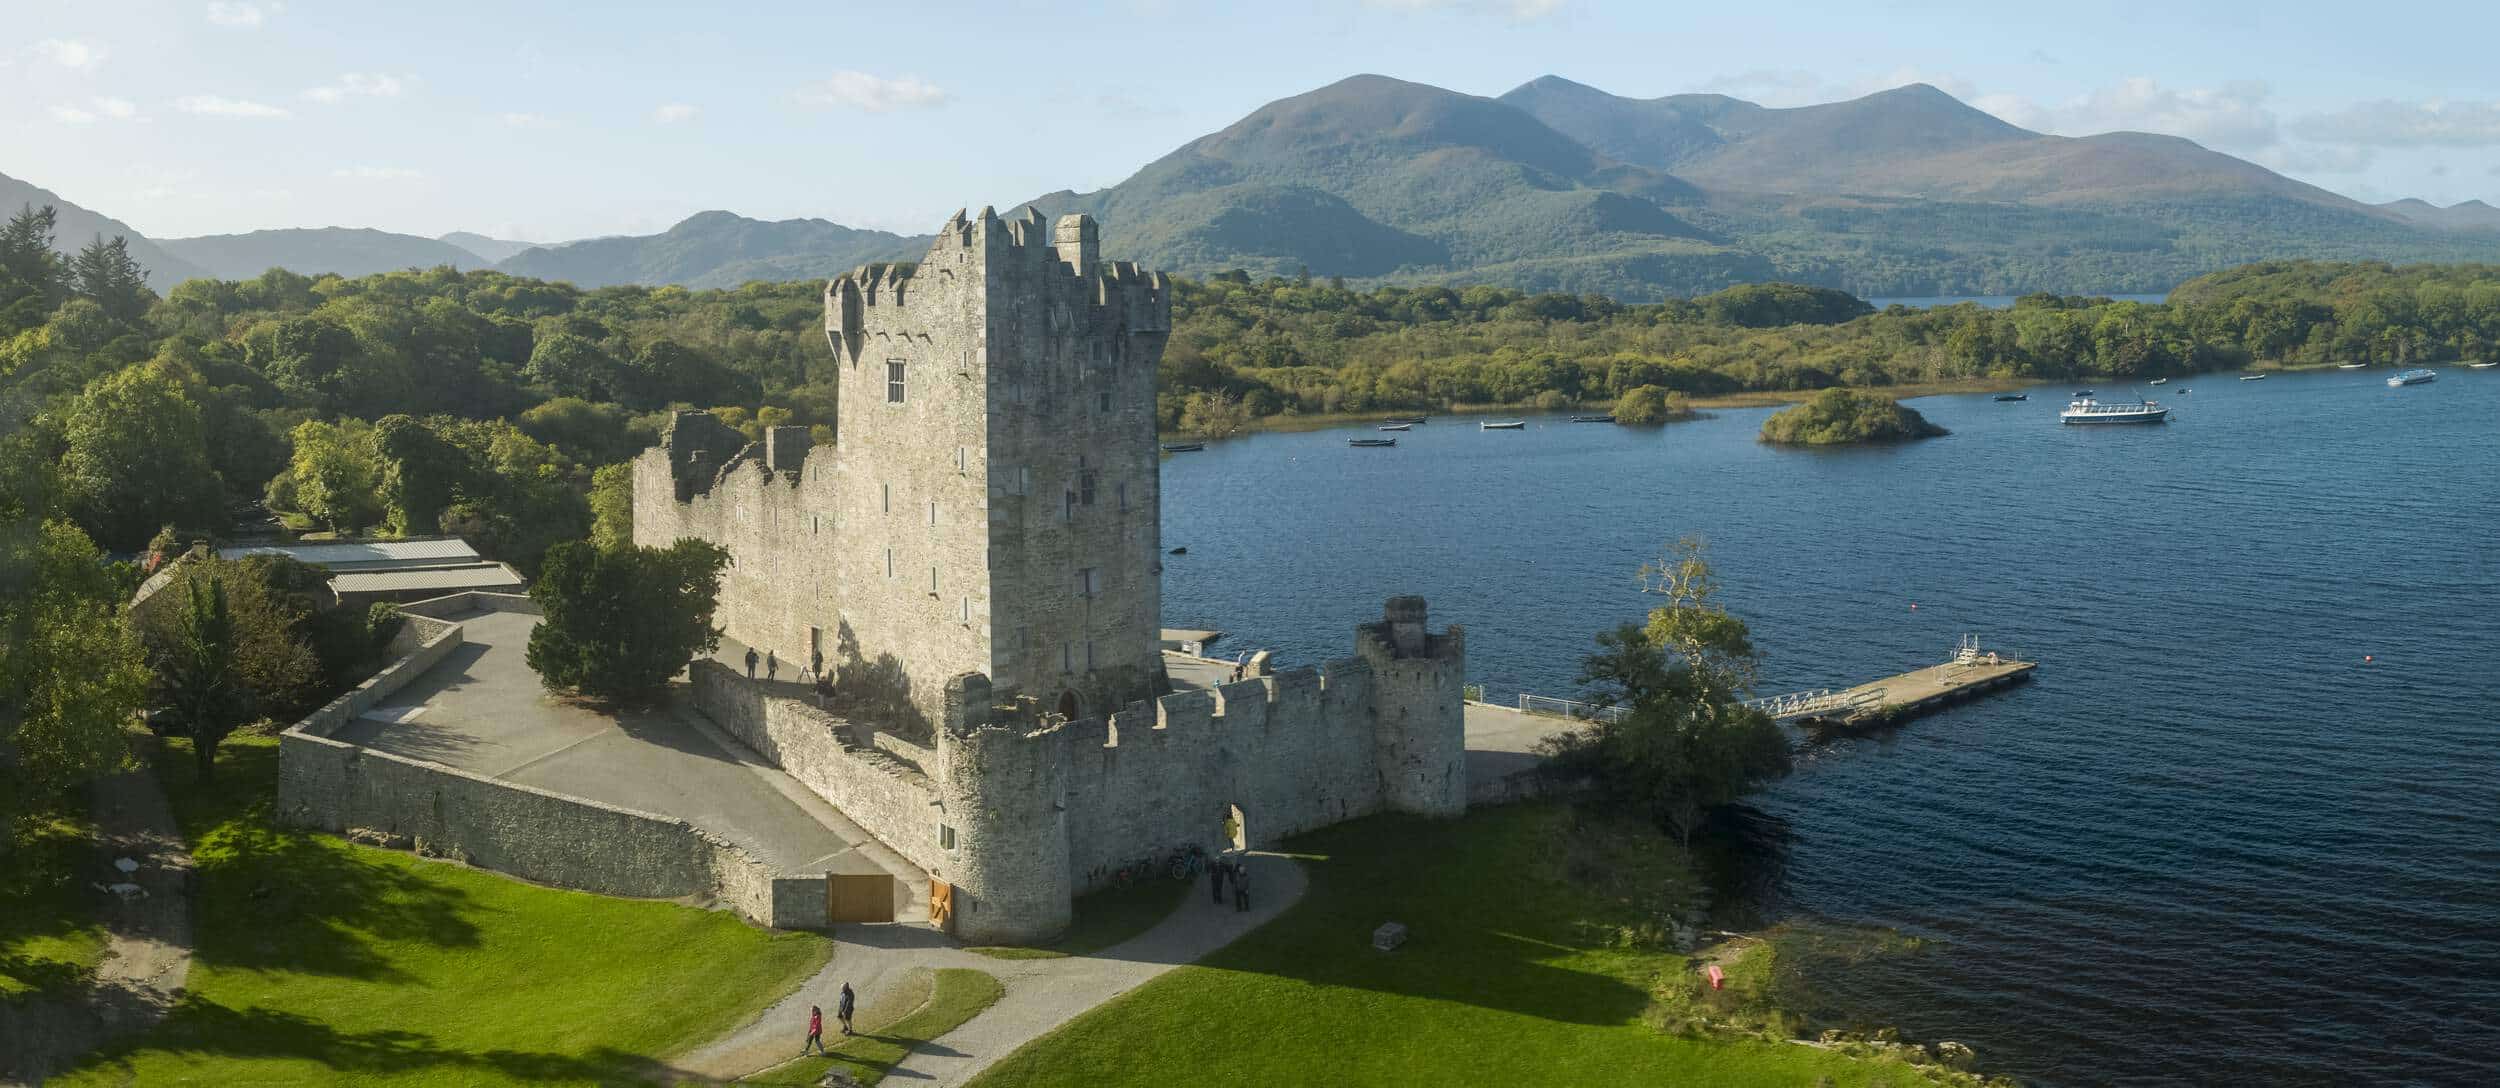 Aerial-view-Ross-castle-Killarney-National-Park-Co-Kerry_Web-Size